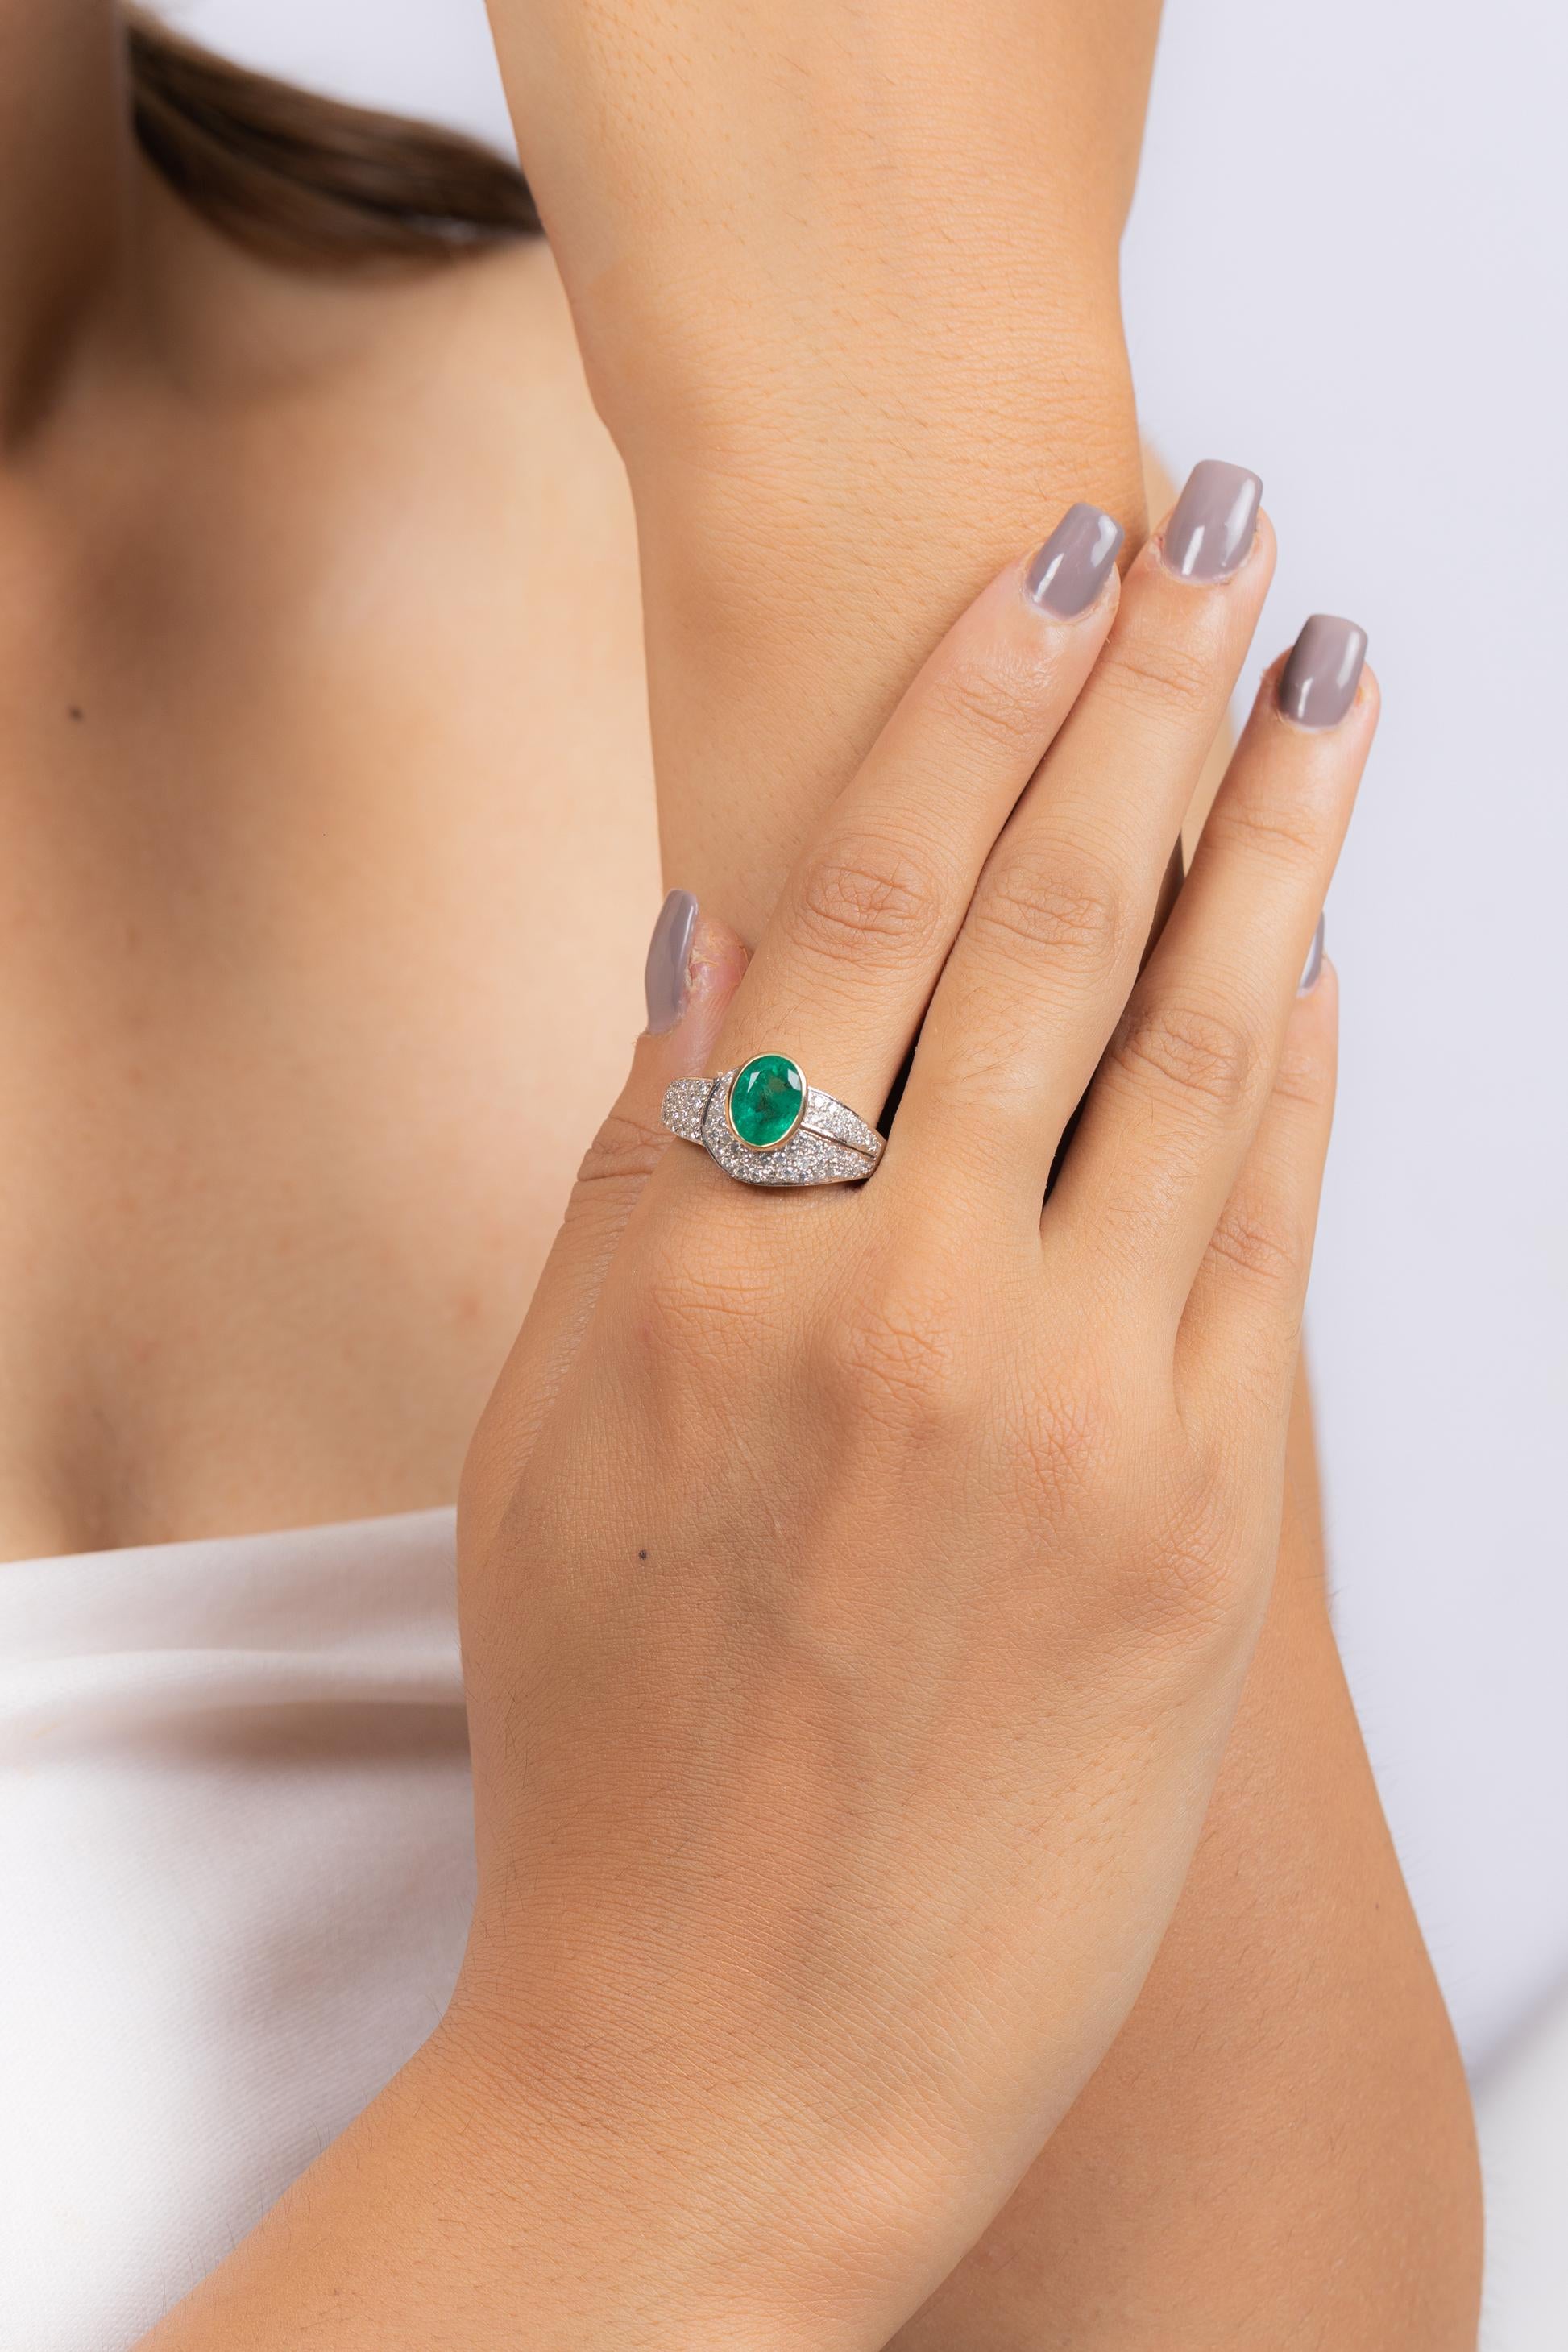 For Sale:  2.45 Carat Emerald and Diamond Ring in 18K White Gold  11